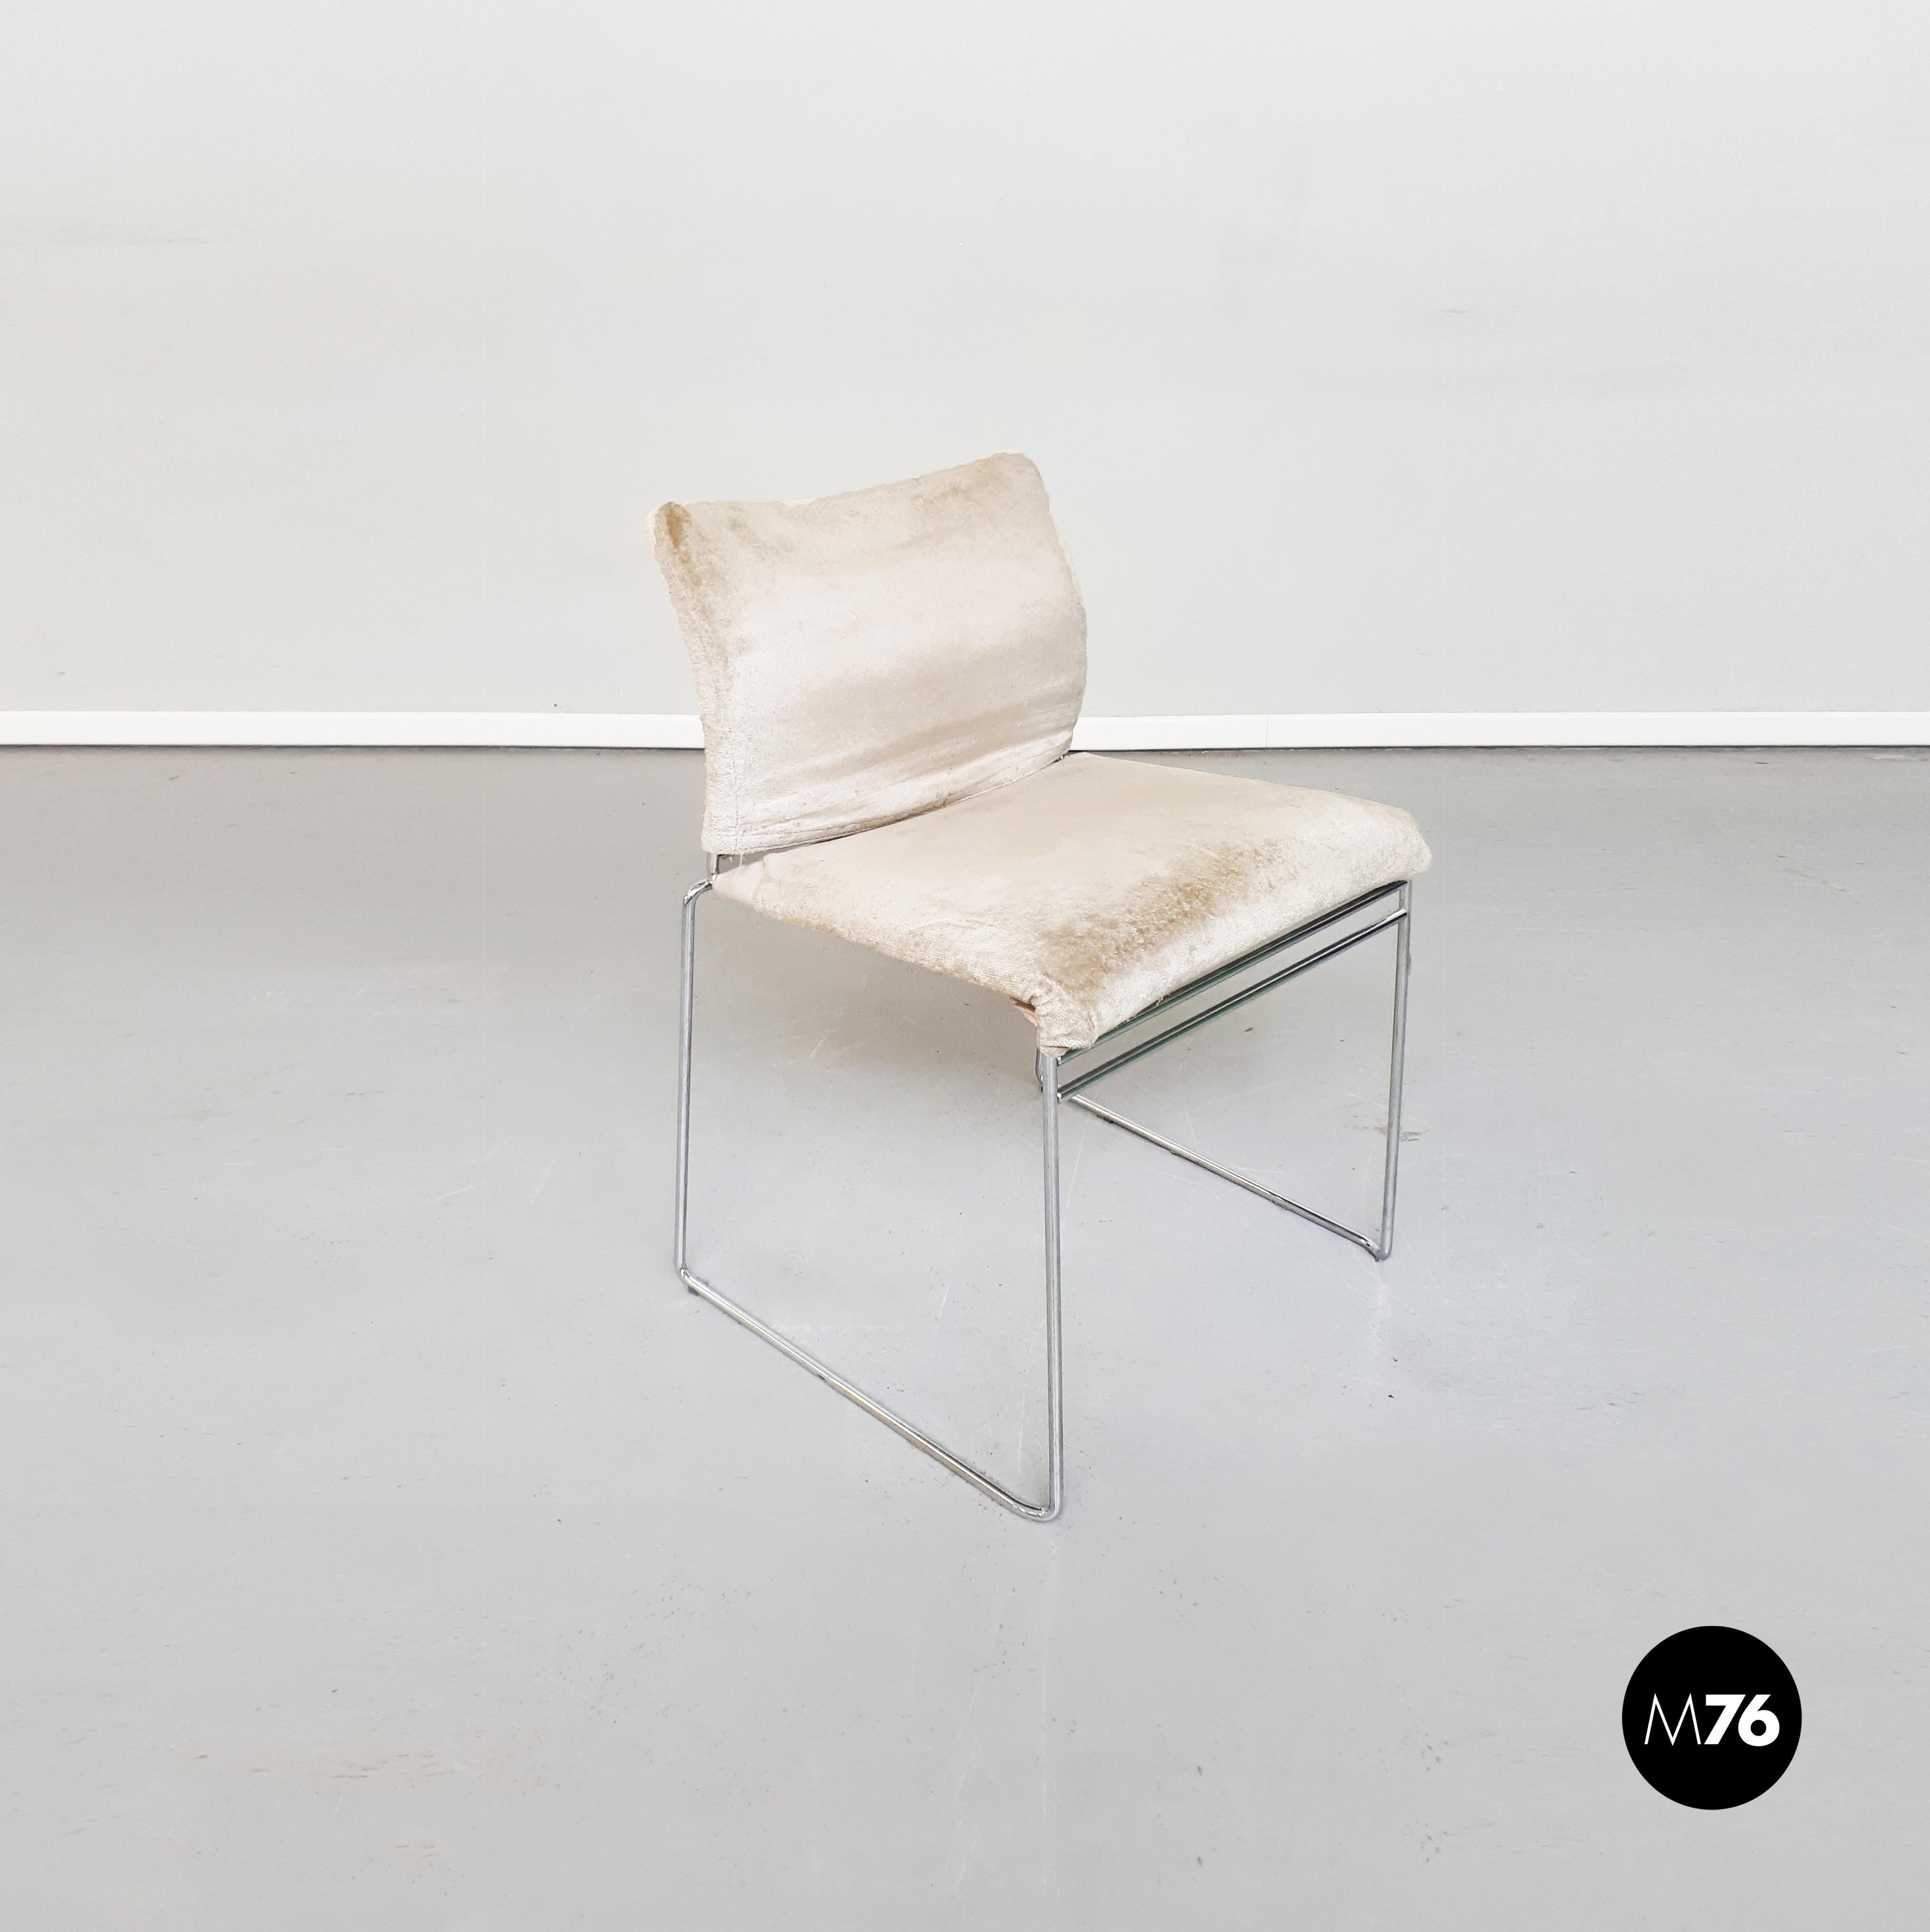 Italian mid-century Tulu chairs by Kazuhide Takahama for Cassina, 1960s.
Set of four Tulu chairs, with fully upholstered seat, covered with a white velvet and with metal structure and reinforced with elastic straps.
Designed by Kazuhide Takahama for